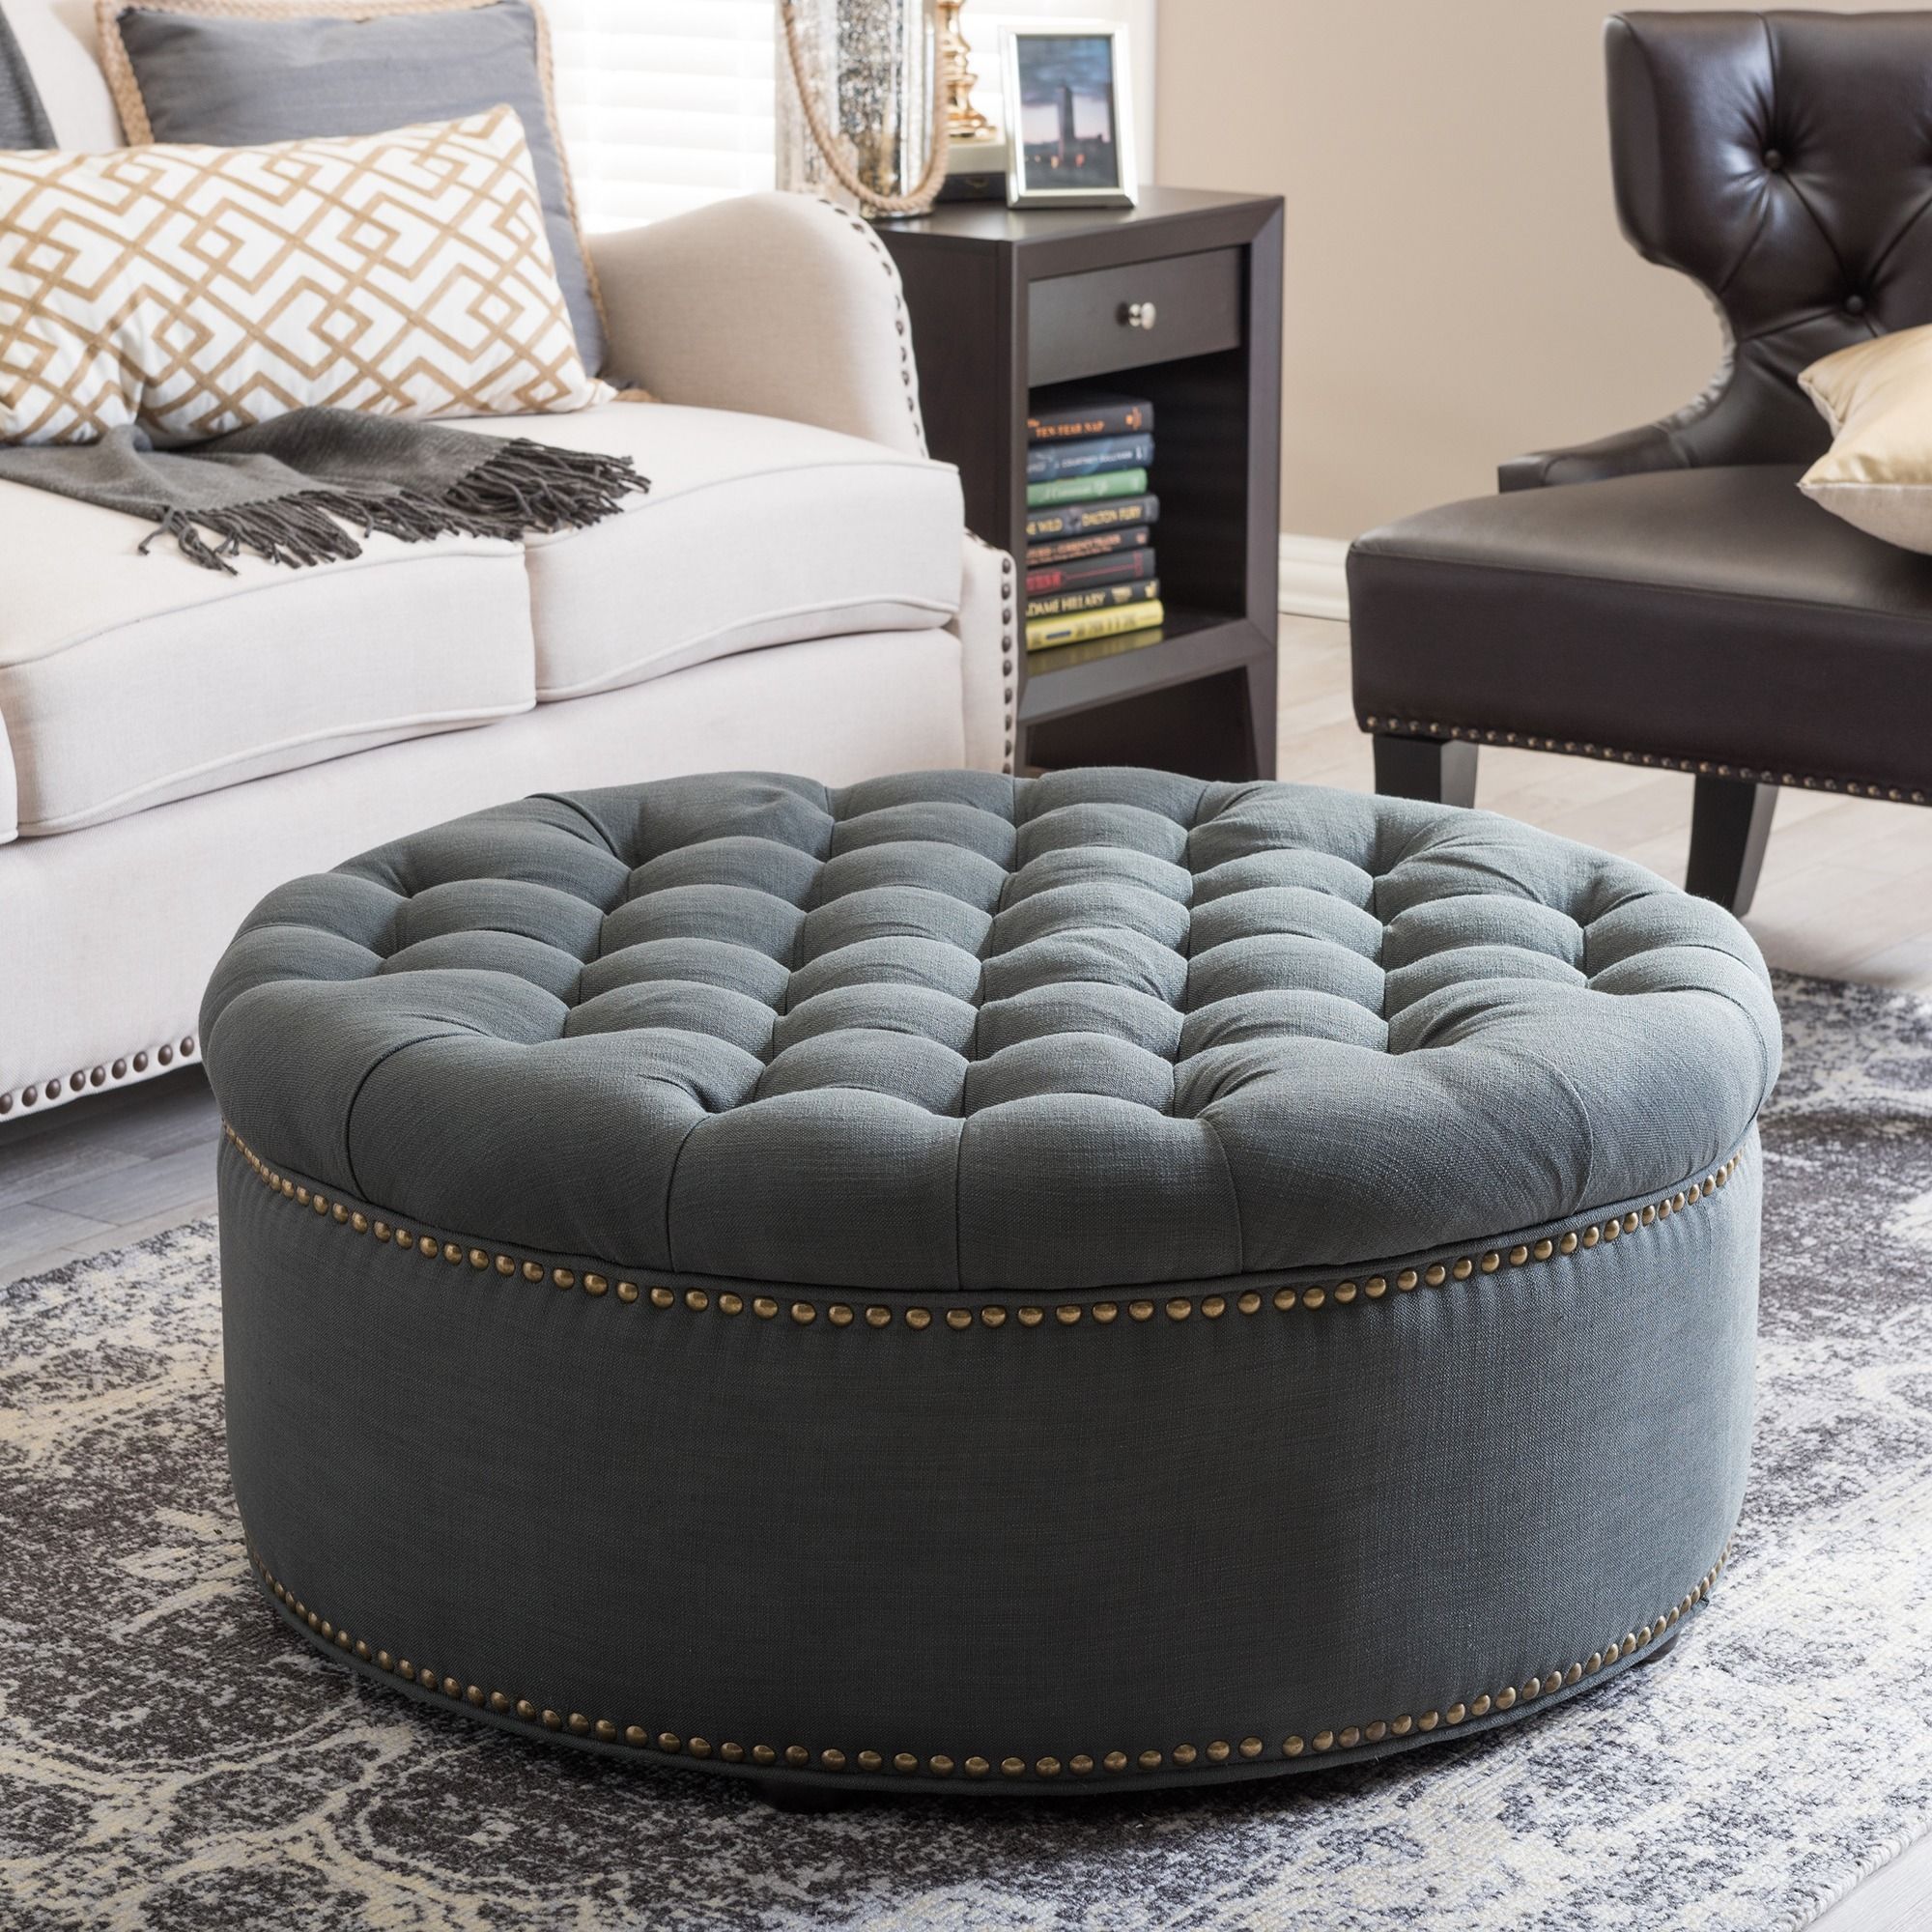 Our Best Living Room Furniture Deals | Tufted Ottoman, Round Storage Regarding Gold And White Leather Round Ottomans (View 6 of 20)